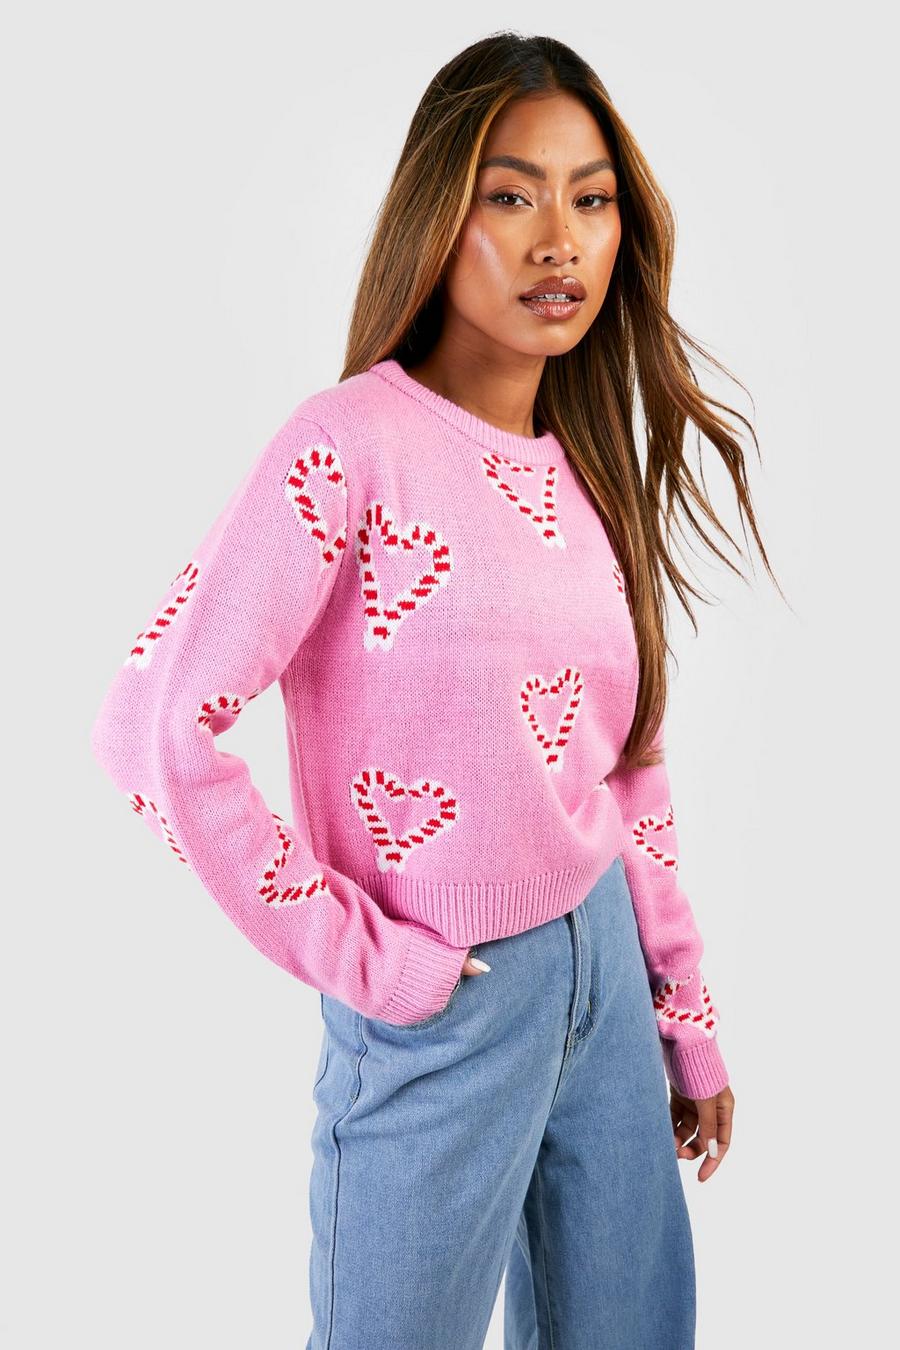 Heart Candy Cane Crop Christmas Sweater